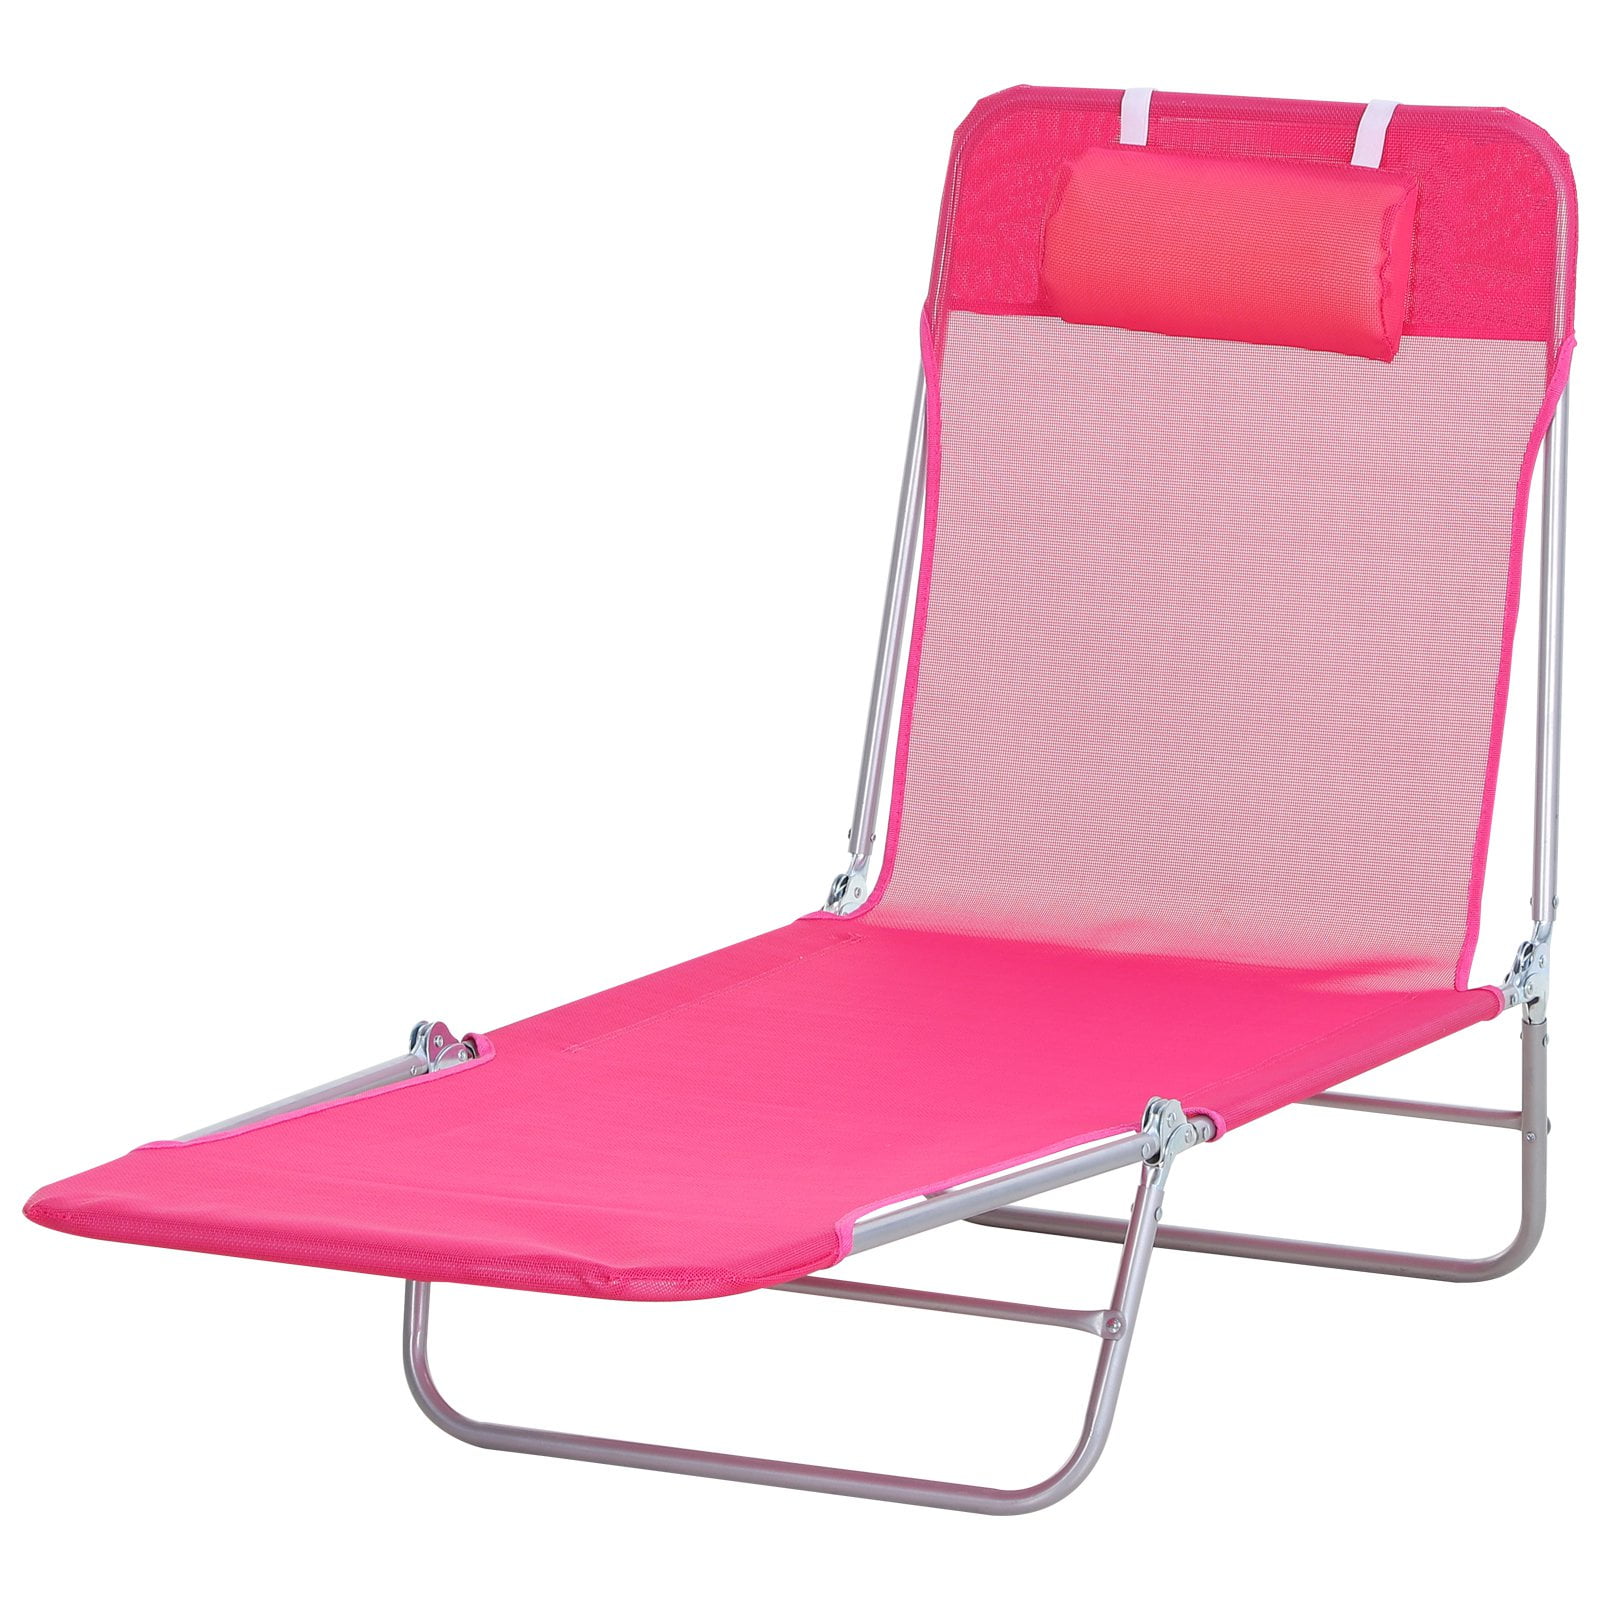 Zimtown Folding Chaise Lounge Chair Patio Outdoor Pool Beach Lawn 